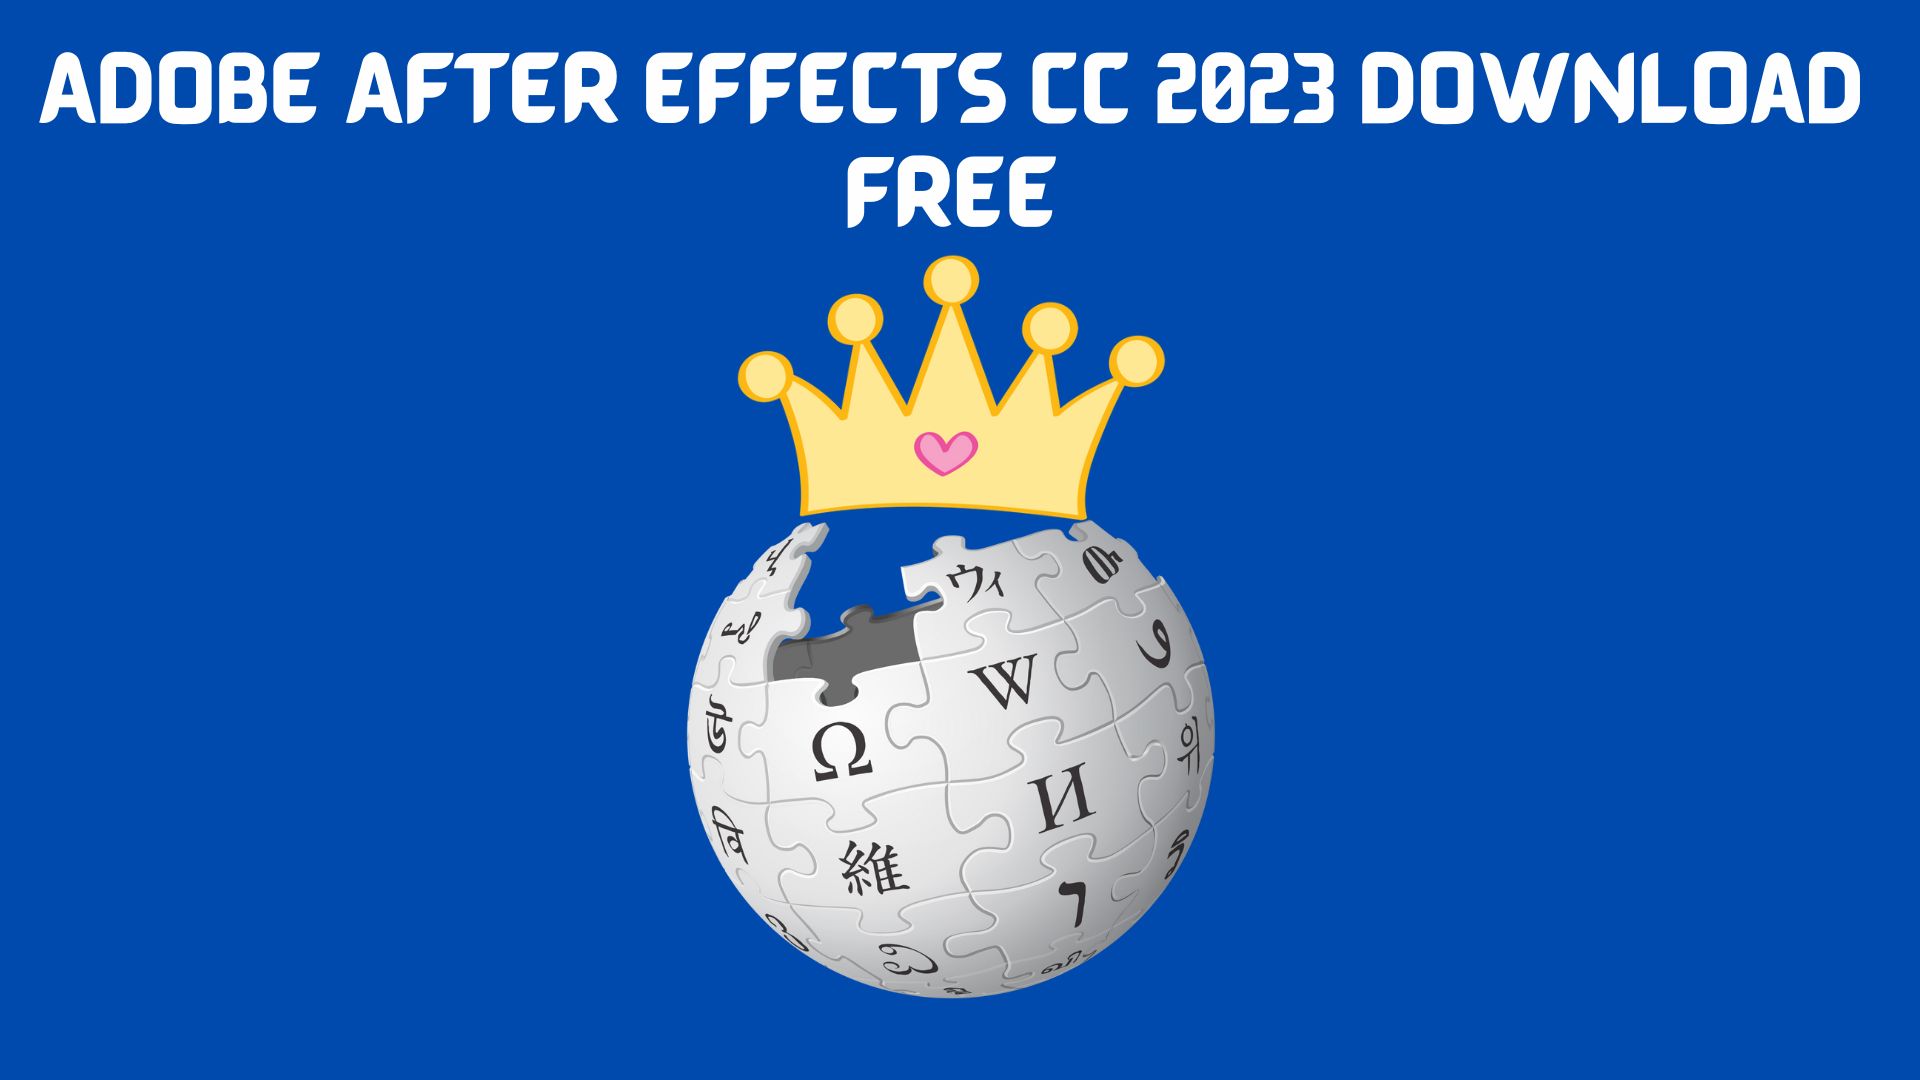 Adobe after effects cc 2023 download free